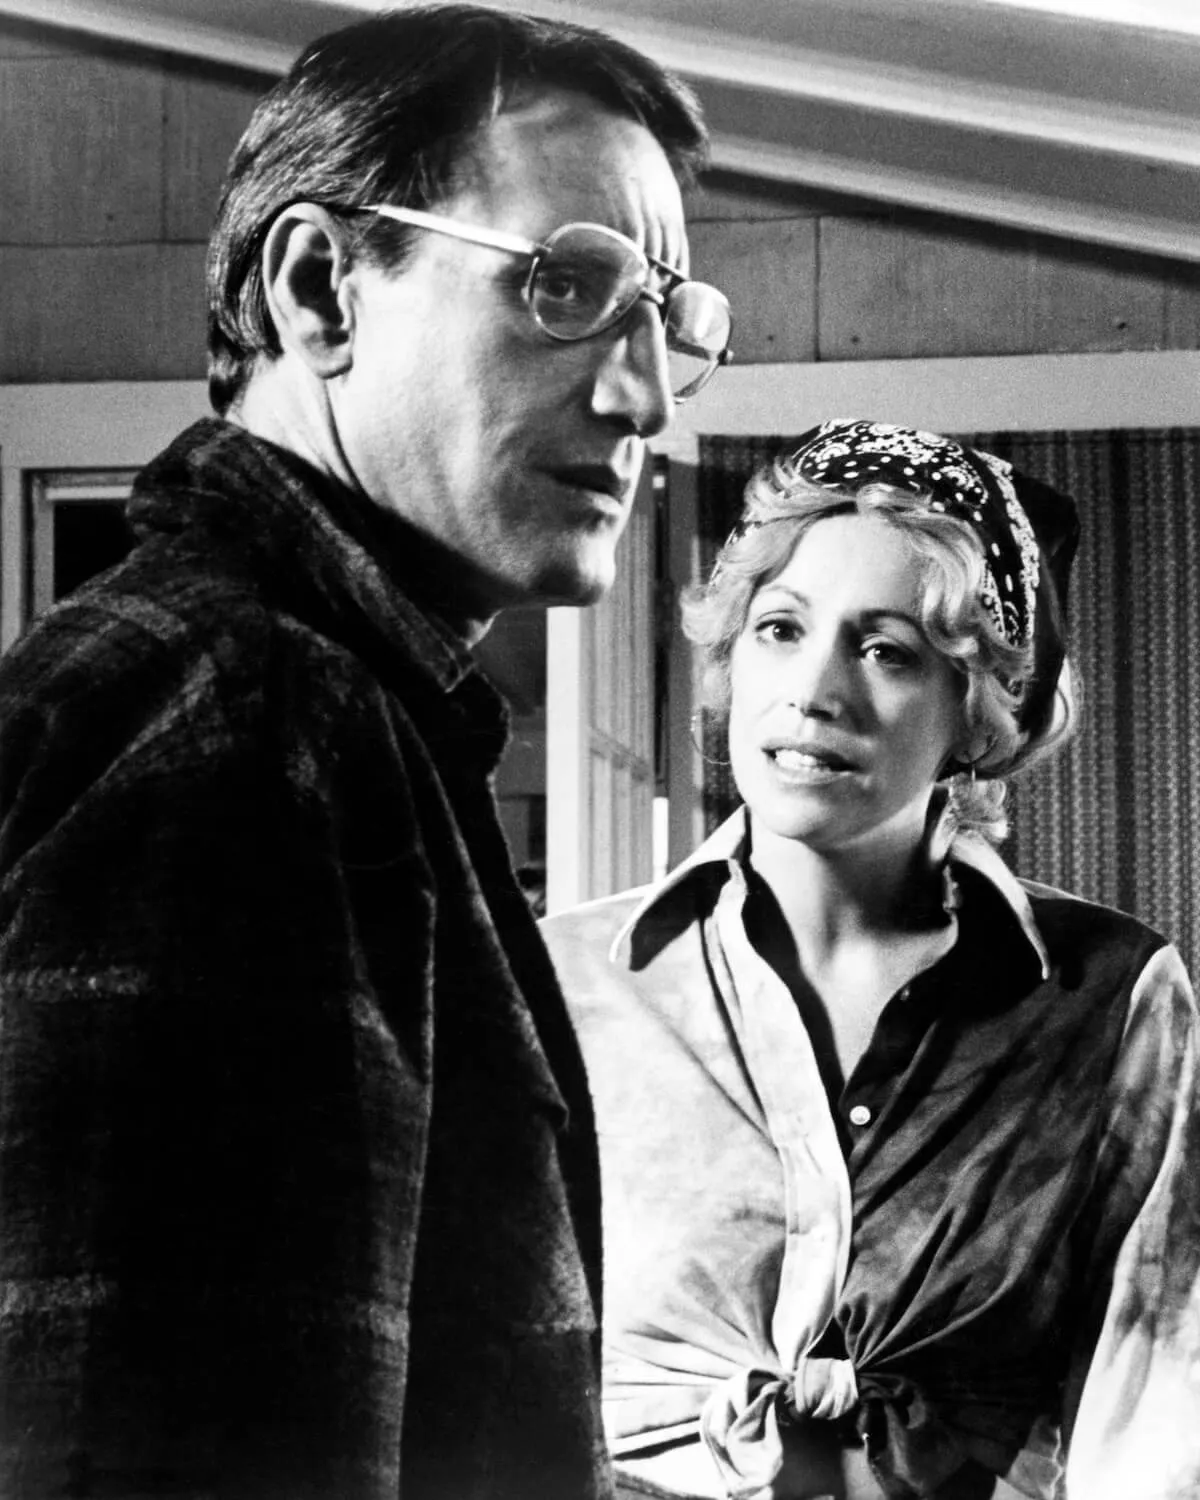 Black and white photo of Roy Scheider and Lorraine Gary in 'Jaws'